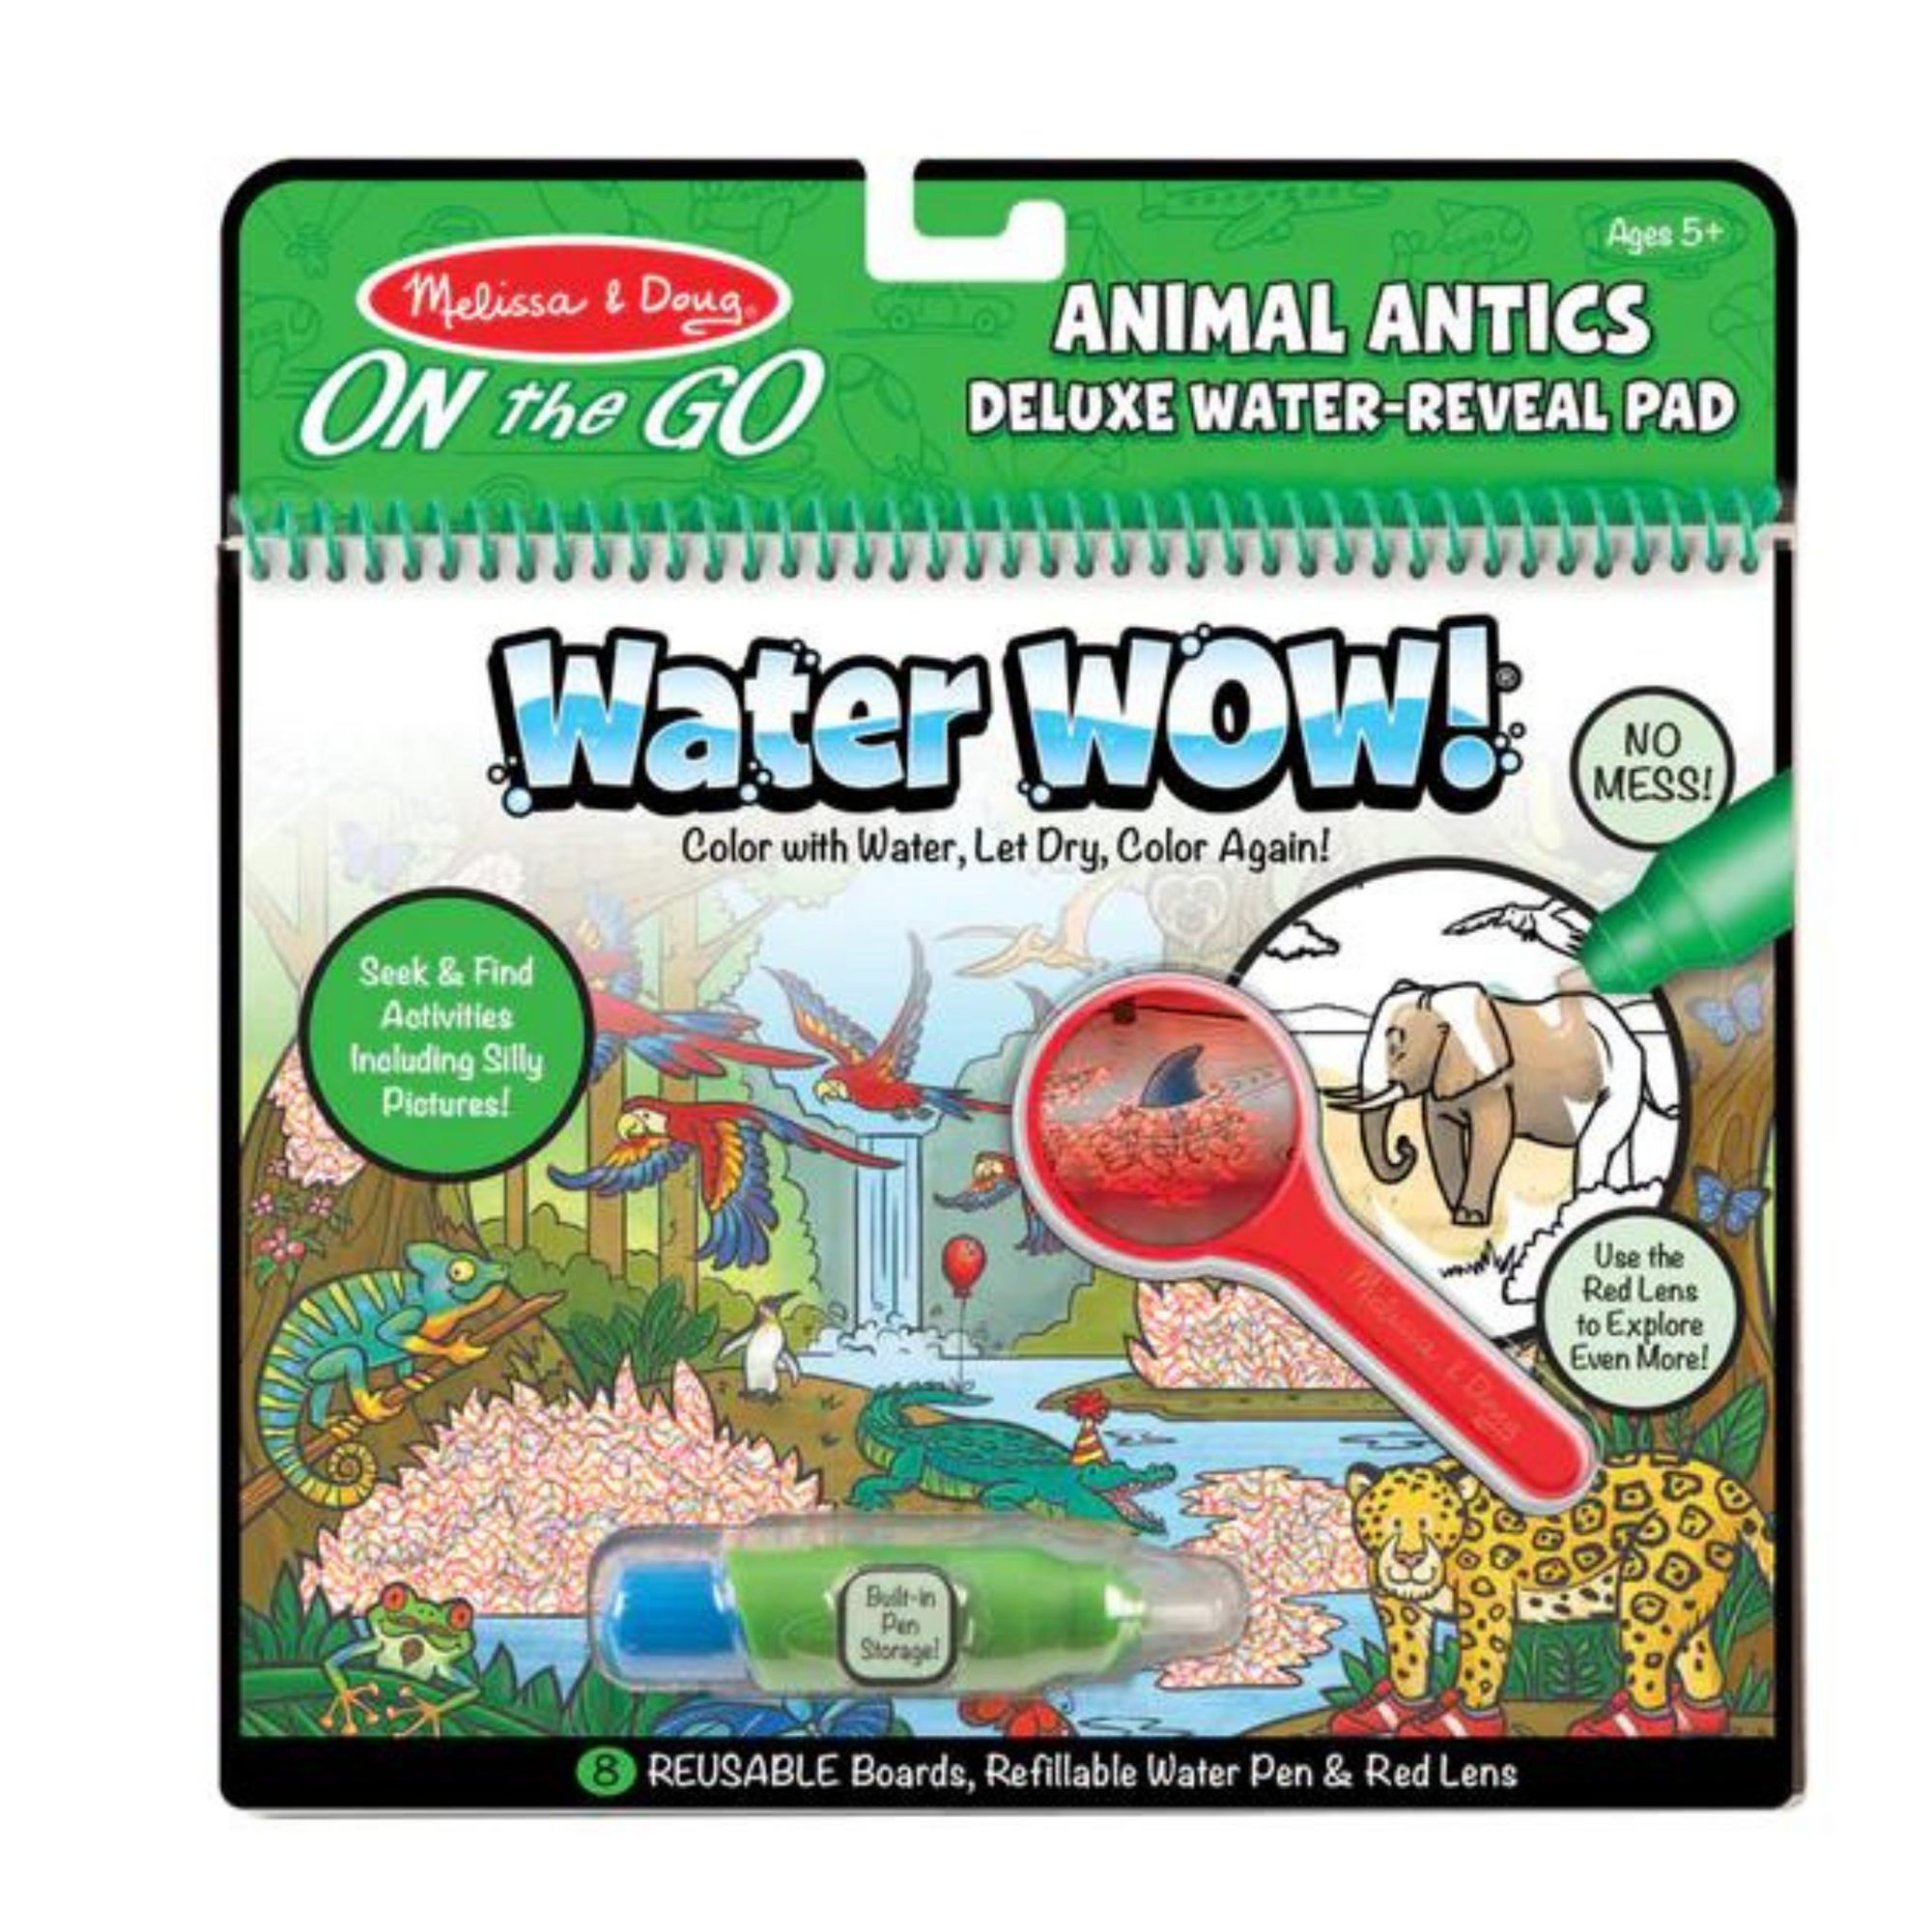 Water Wow deluxe animales